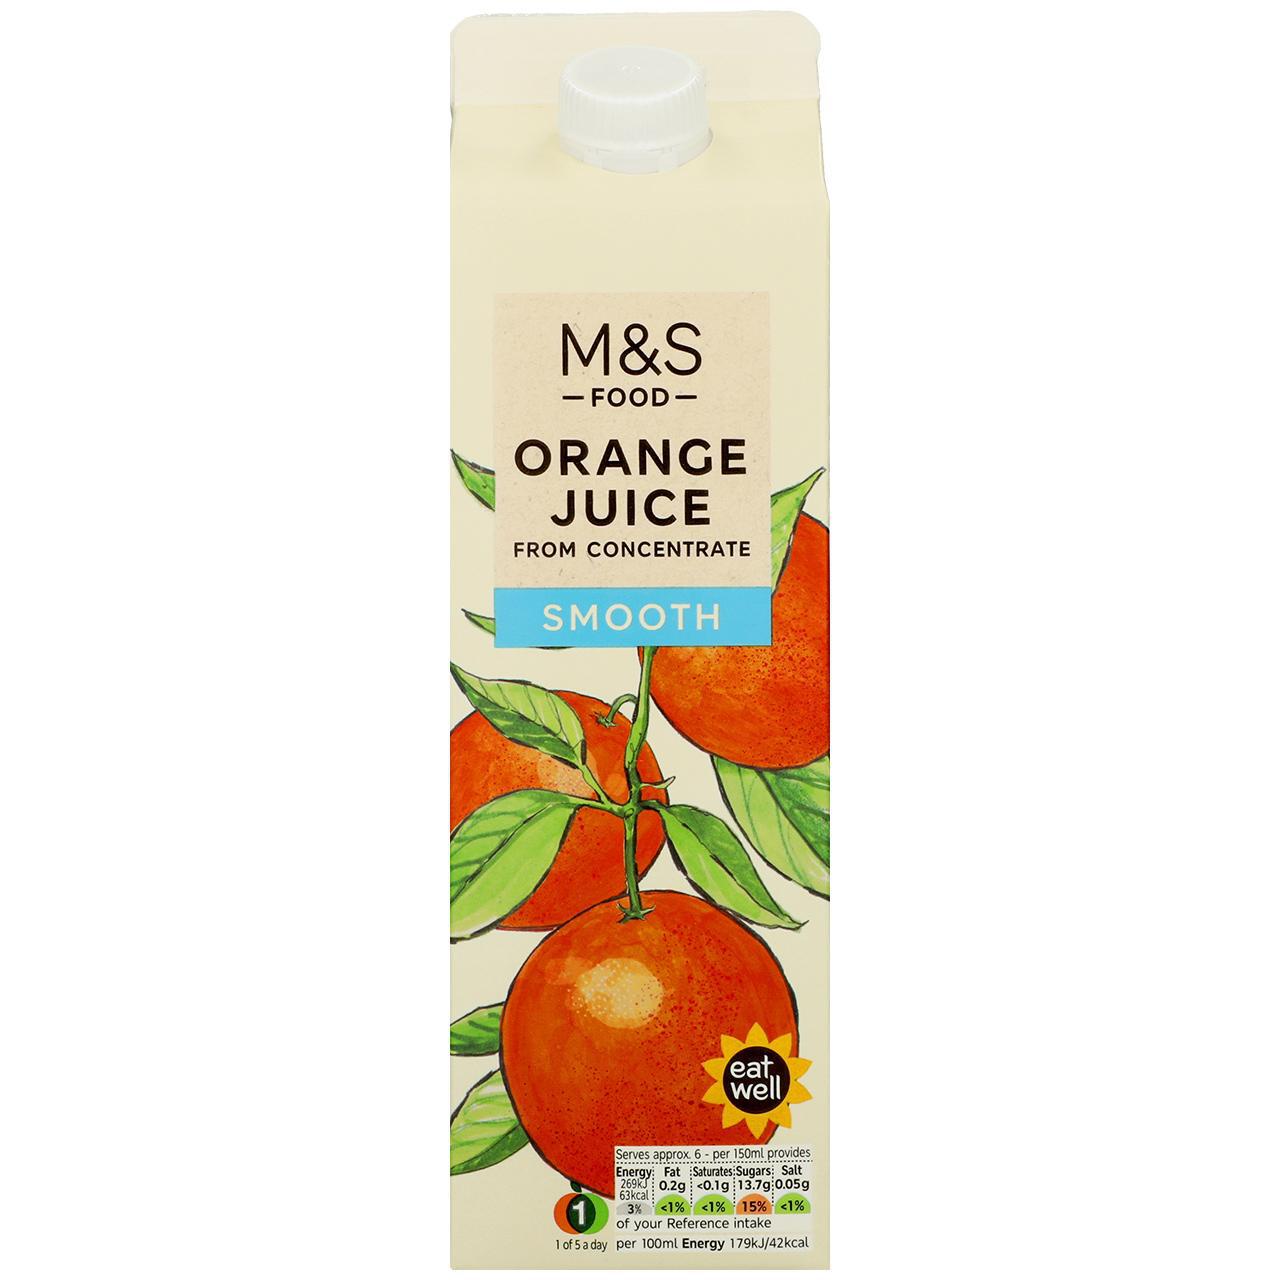 M&S Smooth Orange Juice From Concentrate 1l